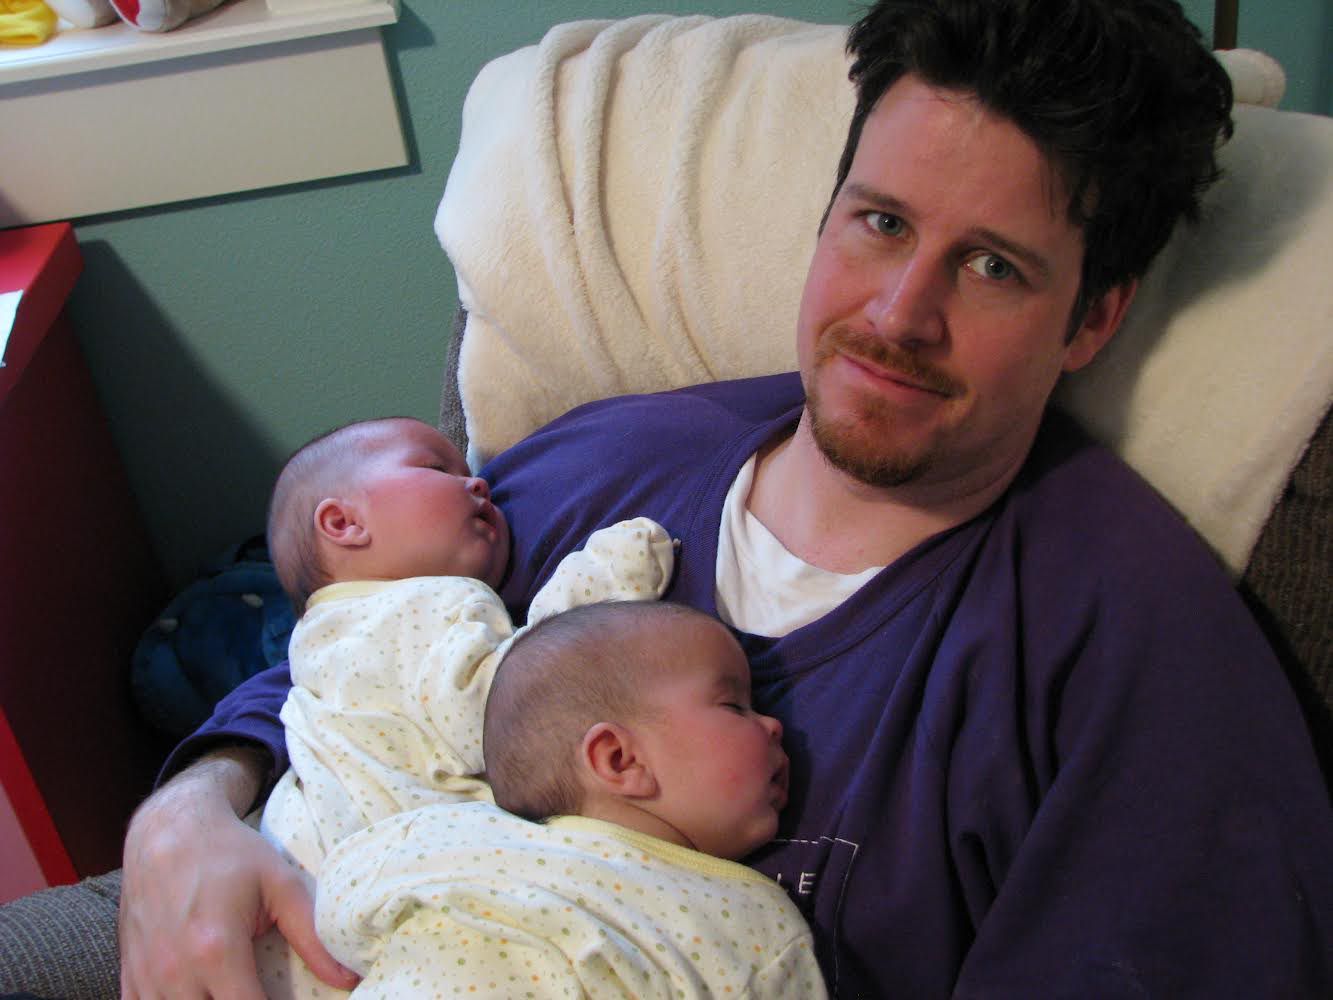 New dad holding twins